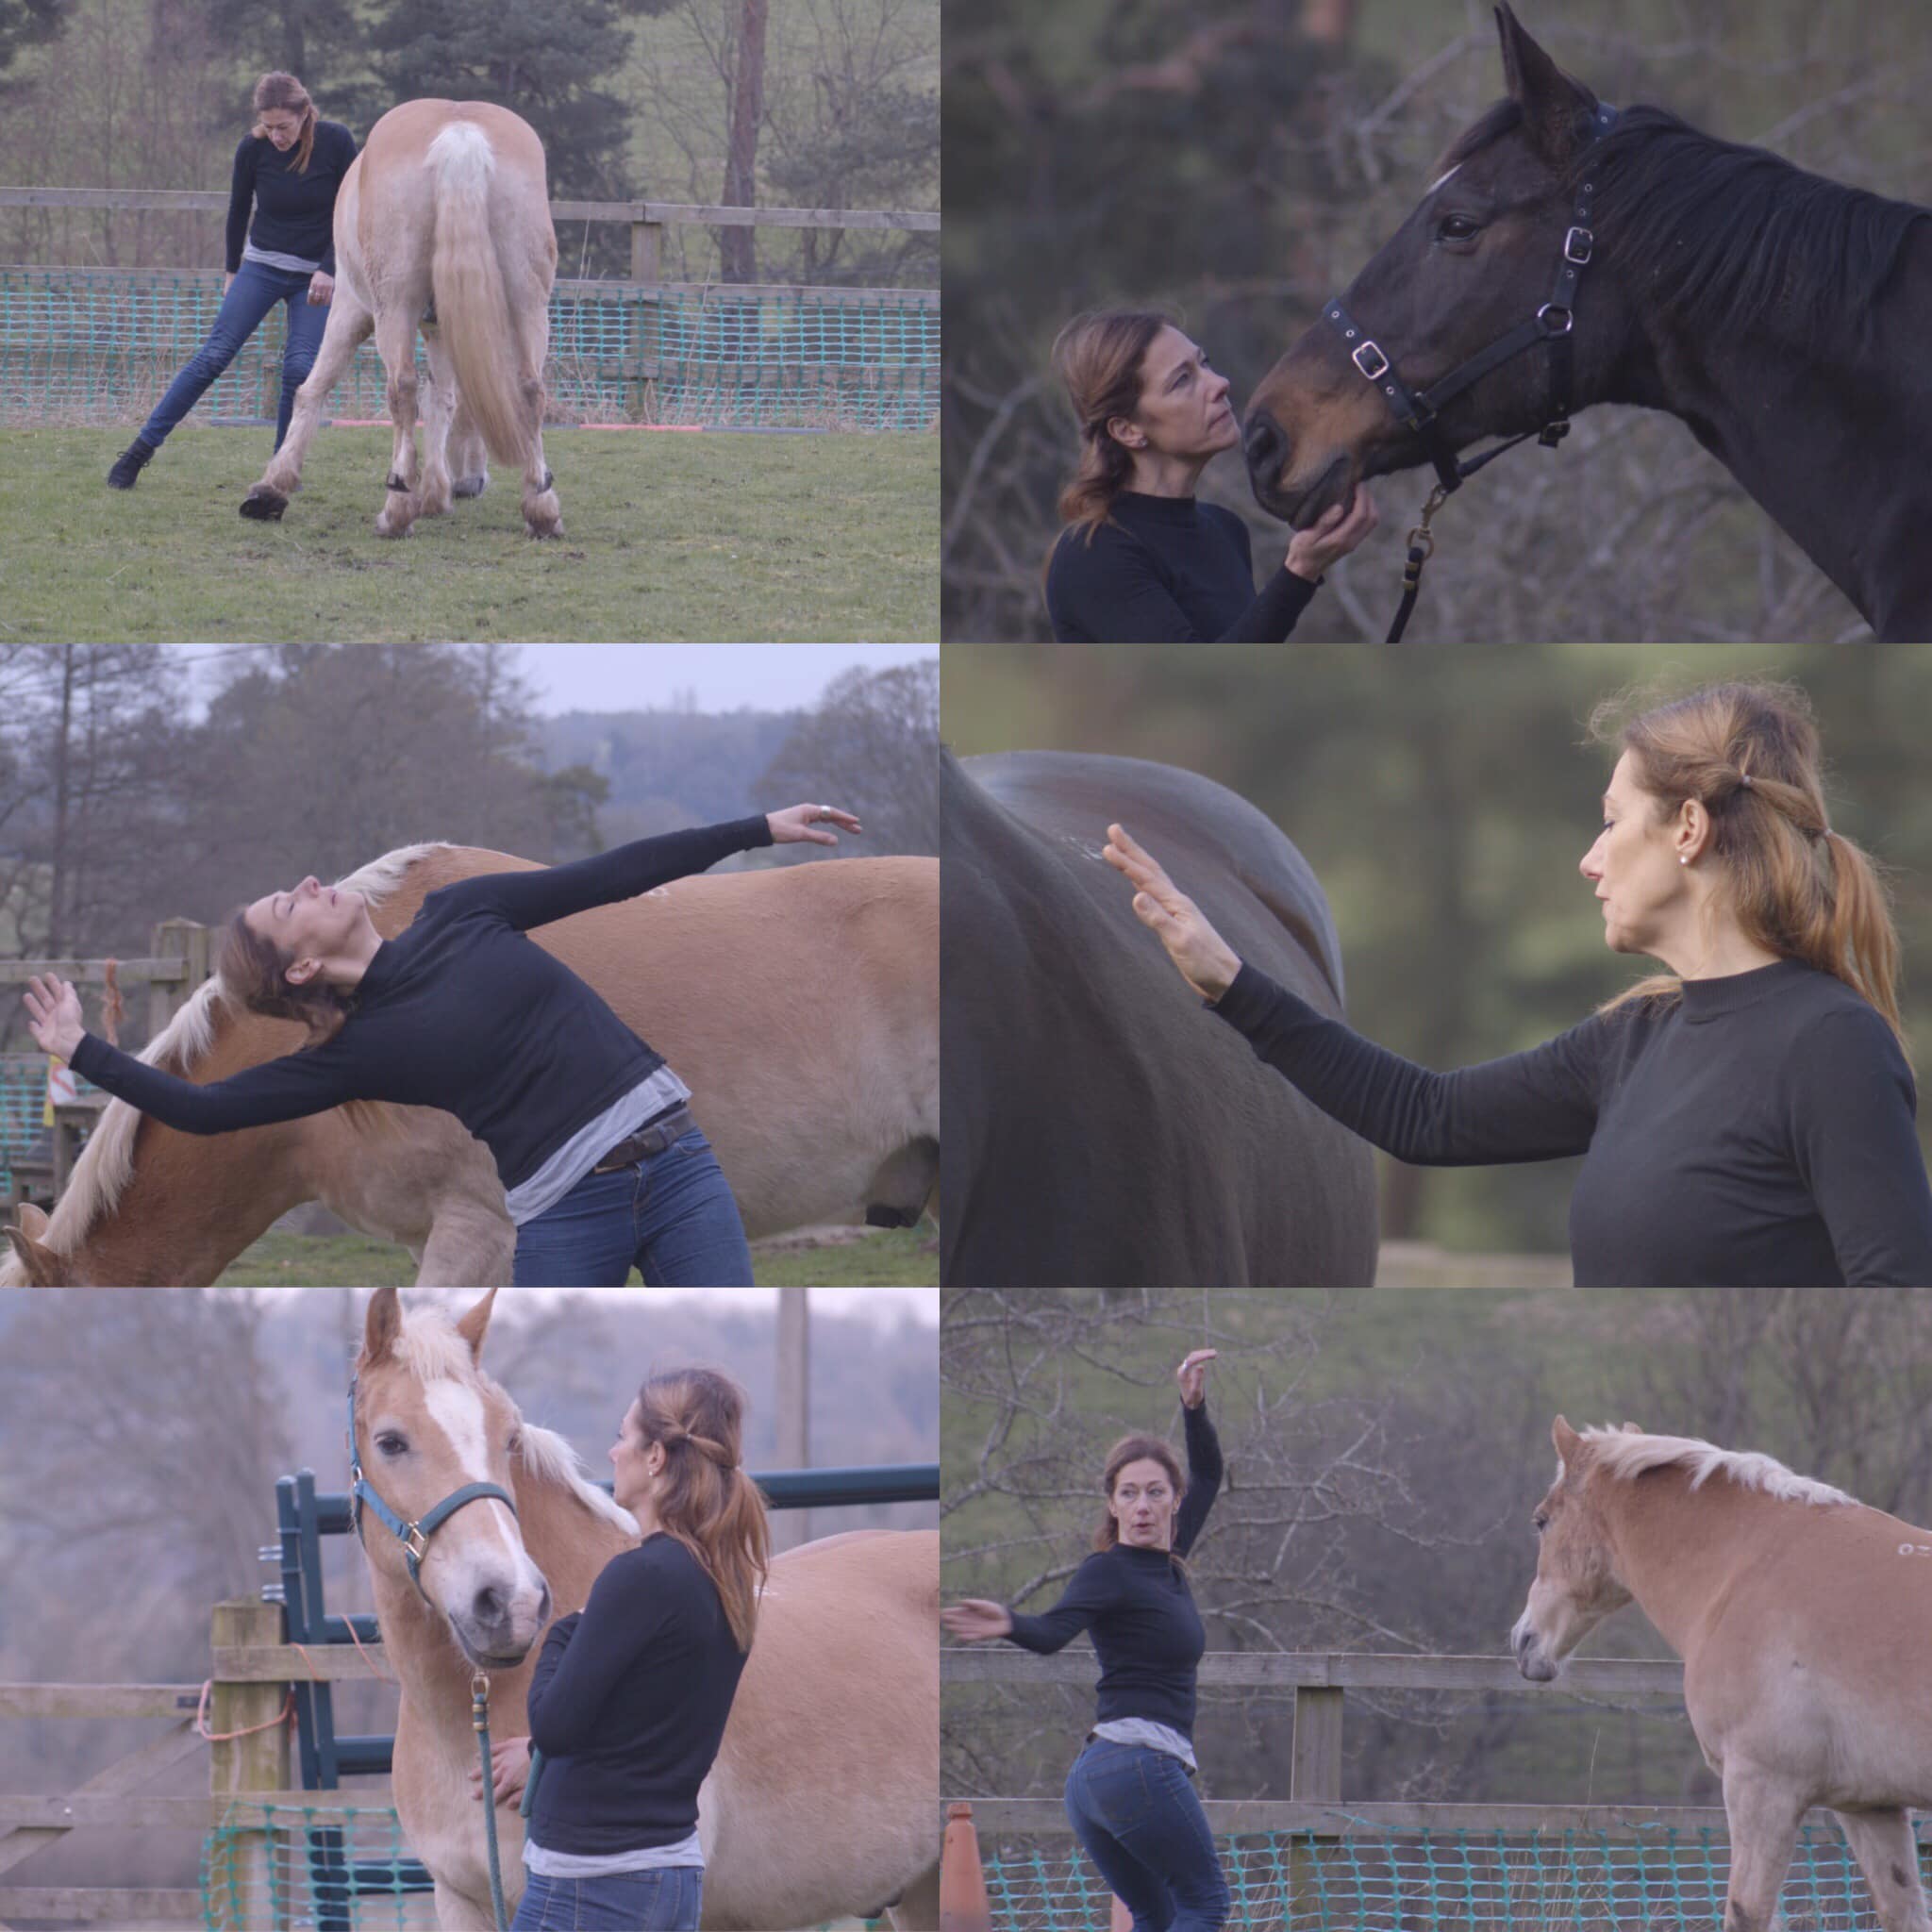 In this collage a woman with long honey-coloured hair, wearing a jumper and blue jeans is dancing with a golden horse with a cream-coloured main. The same woman also stands close to a dark horse. the woman holds the horse gently under her soft nose. They are looking at each other and are very connected. The horses are free and wear natural harnesses.